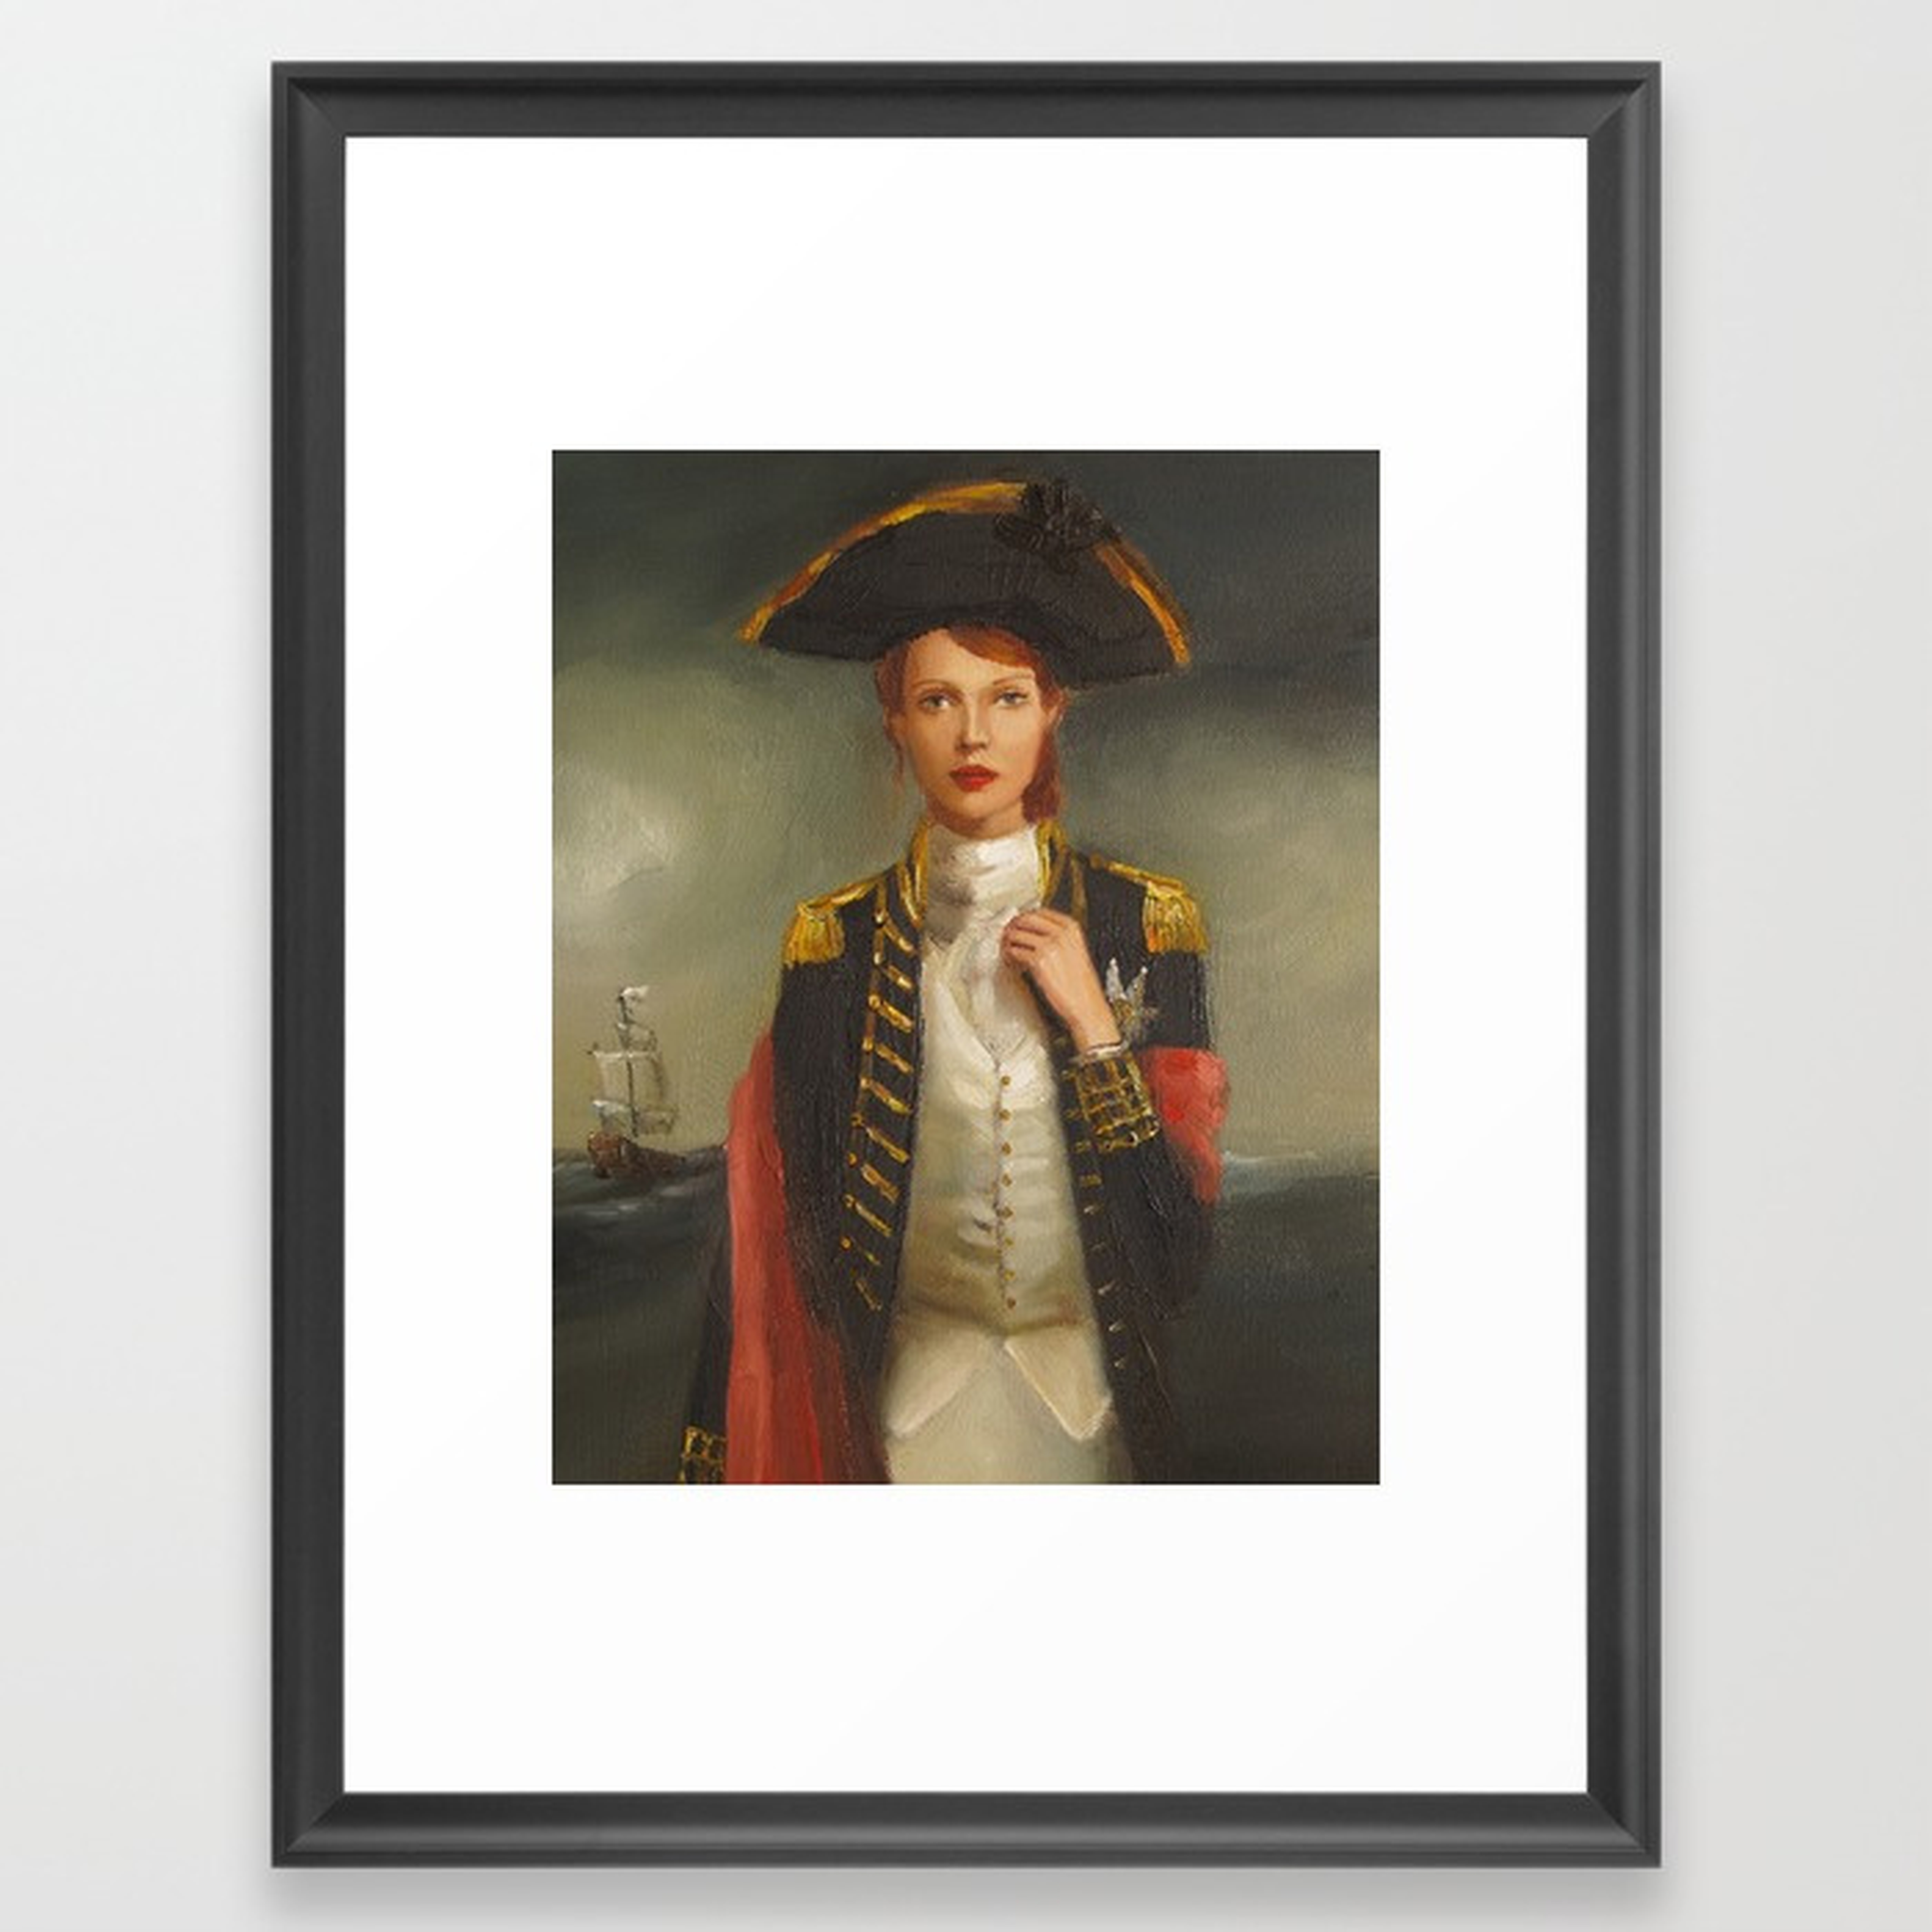 Her Face Launched A Thousand Ships by Janet Hill,  20" x 26” - Scoop Black frame - Society6